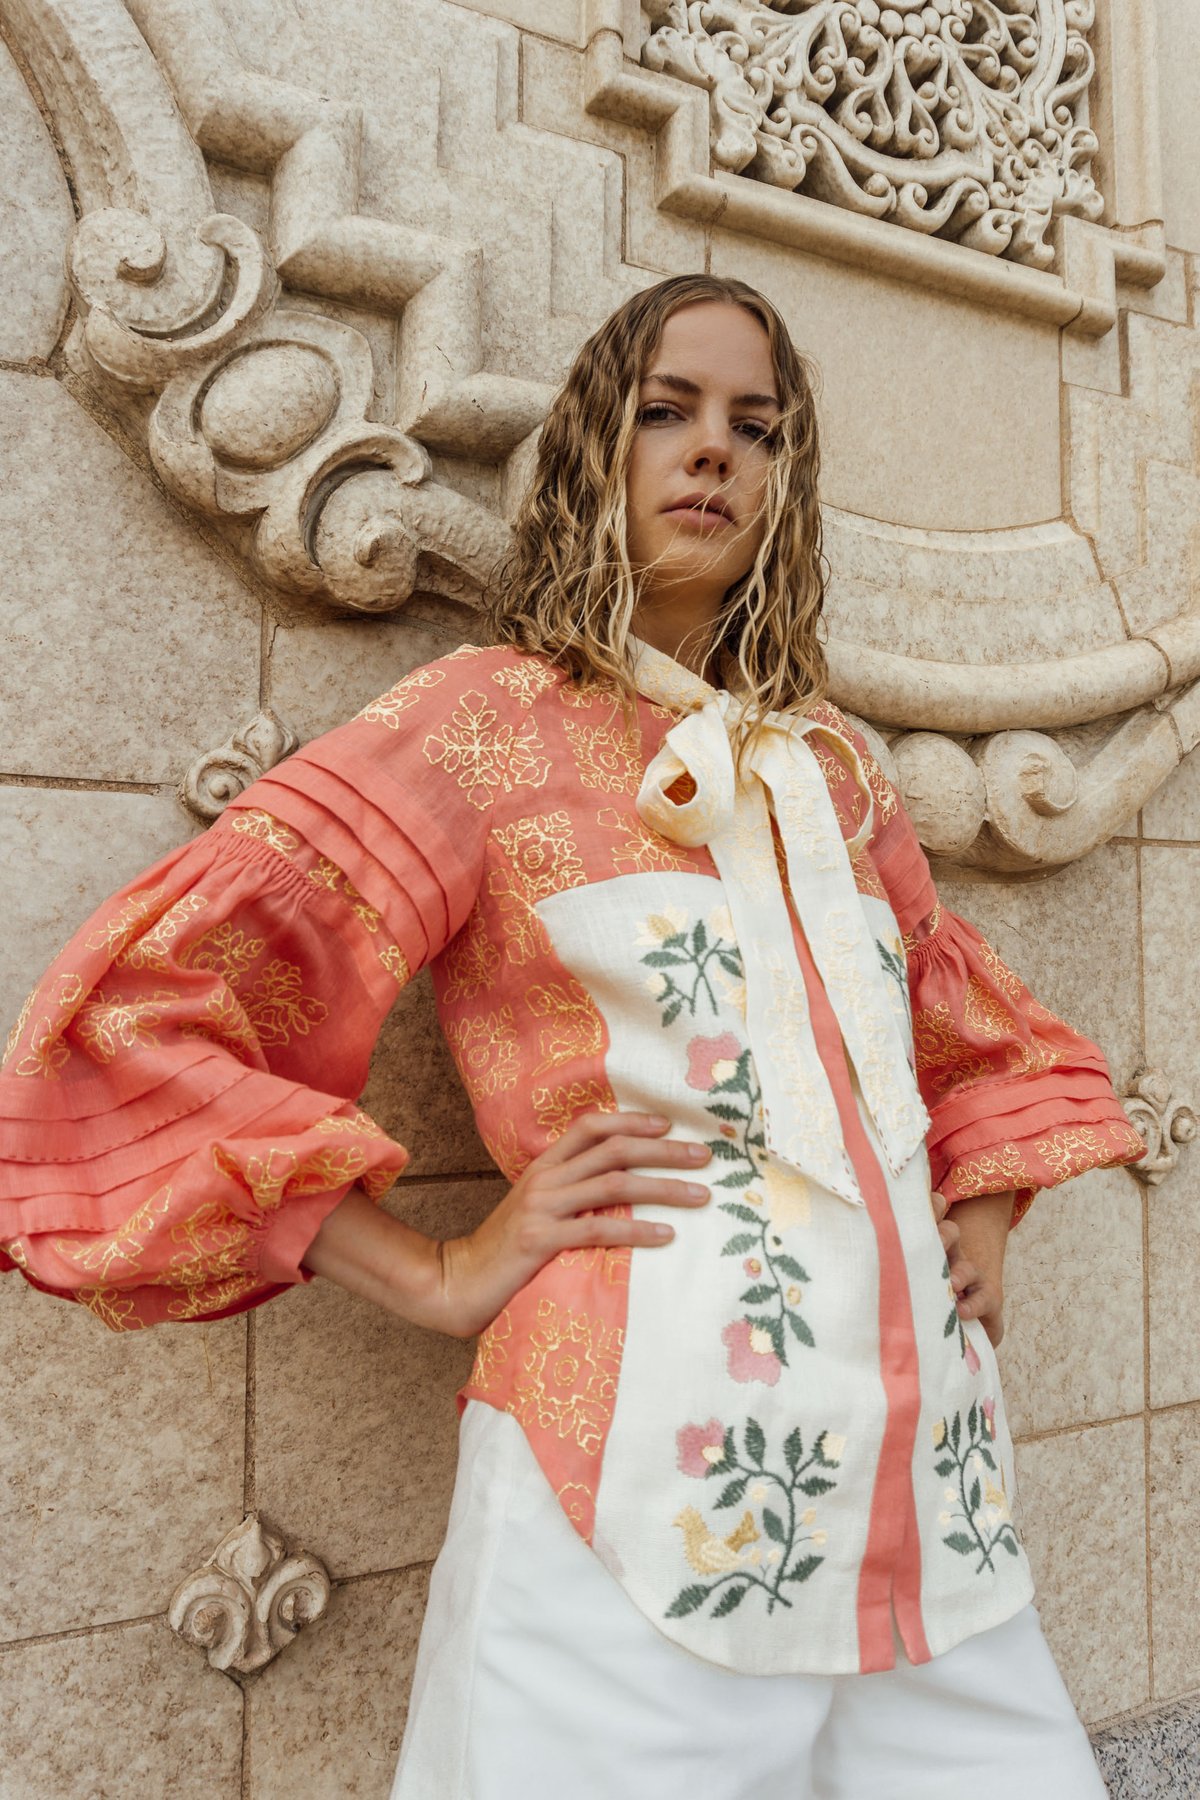 Brand Spotlight: March 11 Embroidered Dresses